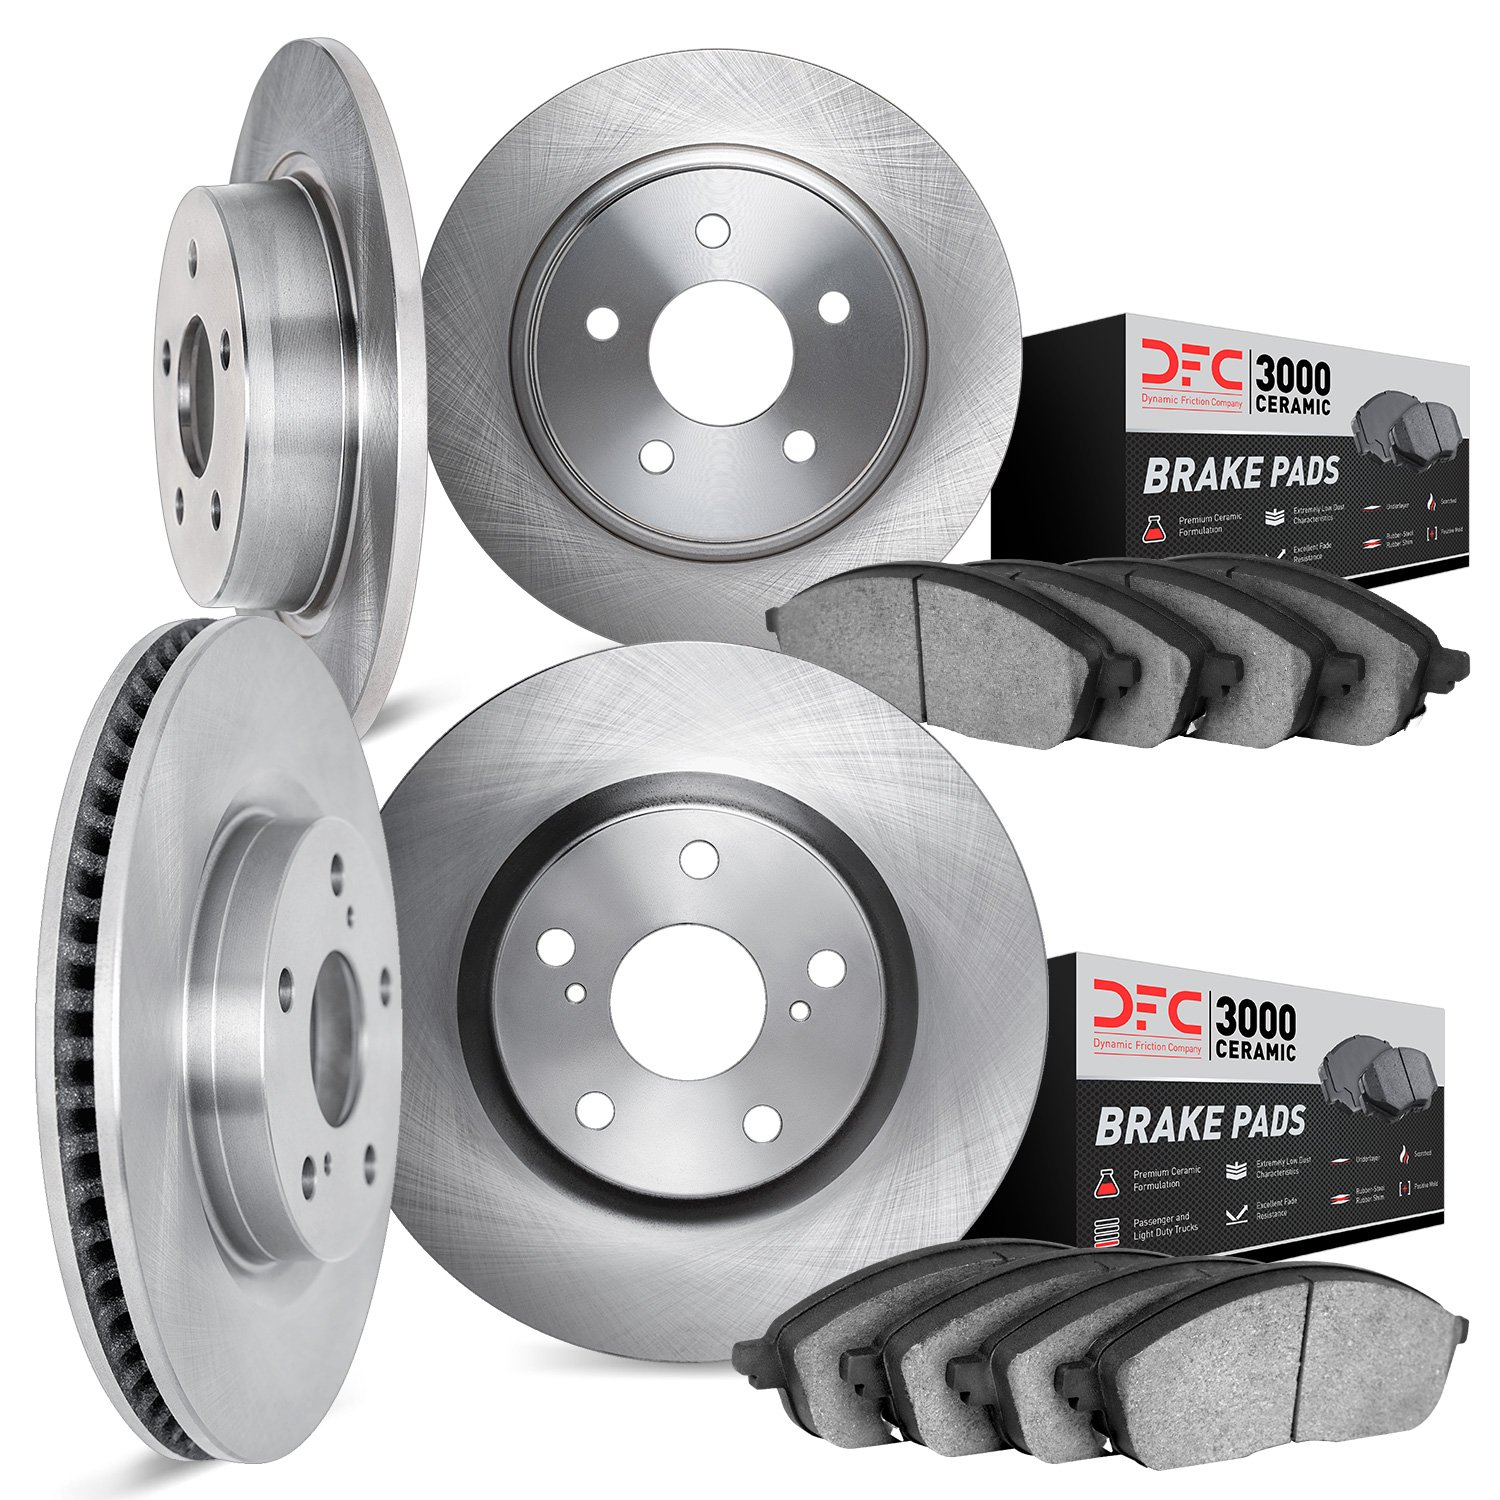 6304-76048 Brake Rotors with 3000-Series Ceramic Brake Pads Kit, 2004-2005 Lexus/Toyota/Scion, Position: Front and Rear